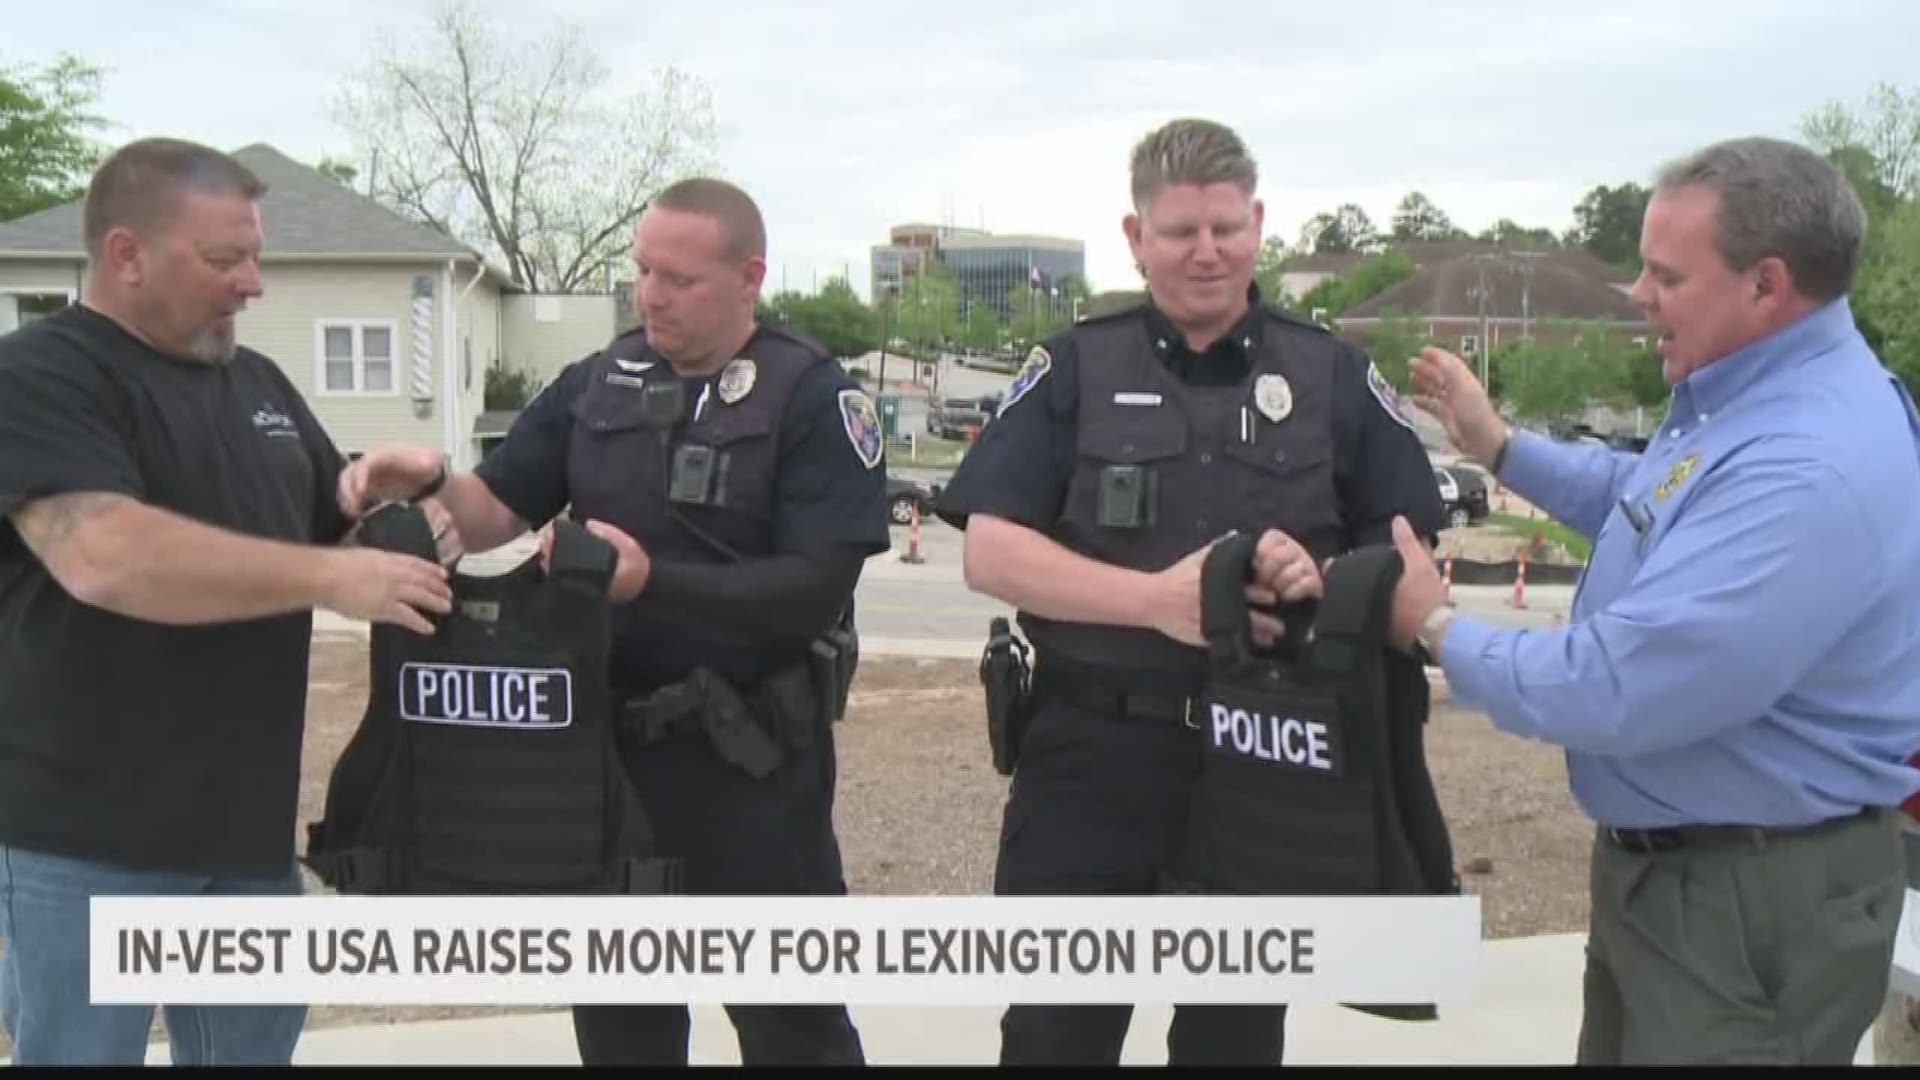 An organization held a concert on Sunday to raise money for police vests for the Lexington Police Department.